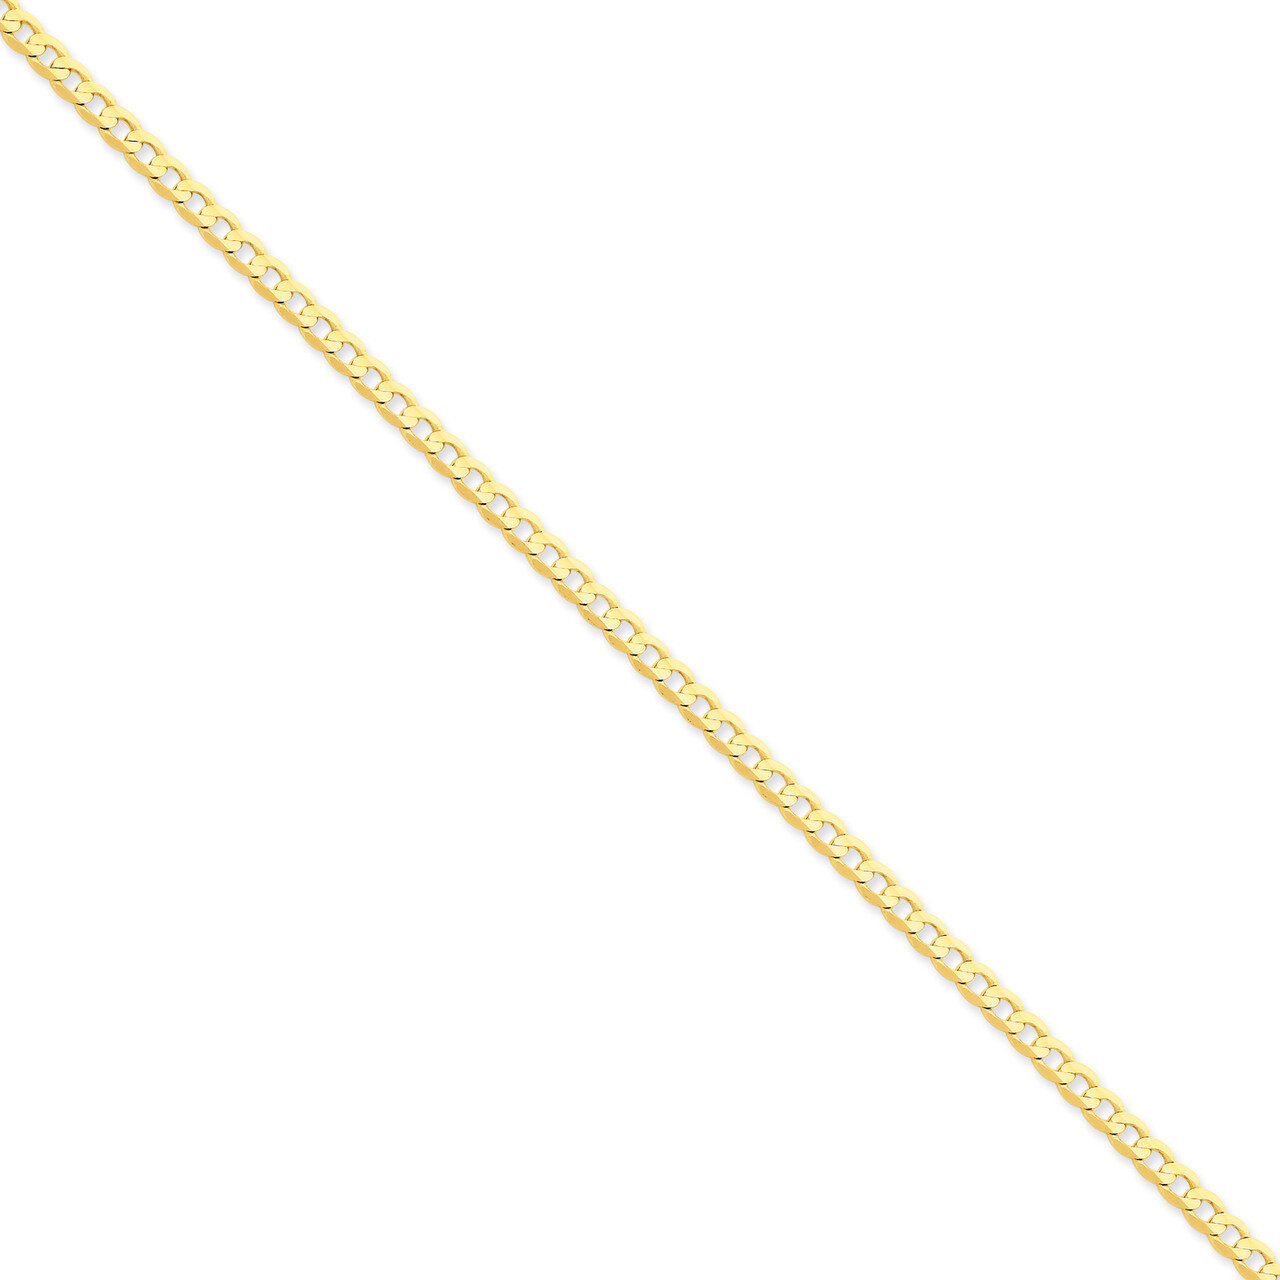 3.8mm Concave Curb Chain 22 Inch 14k Gold LCR100-22